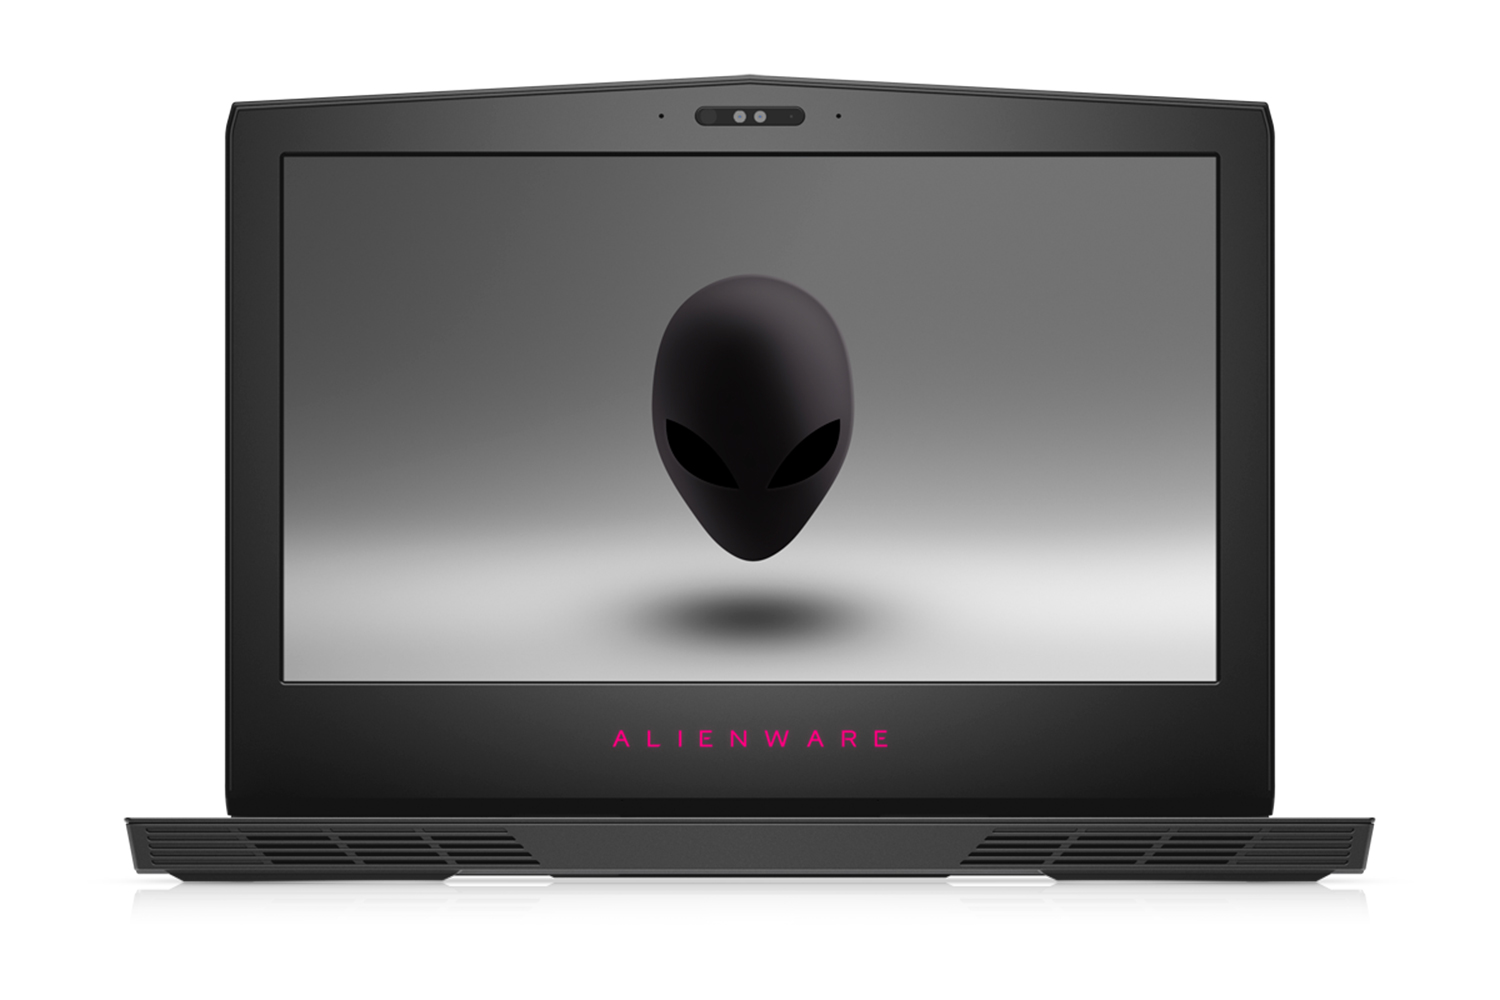 dell alienware inspiron 7000 gaming laptops refresh intel seventh gen cpu aw 15 01